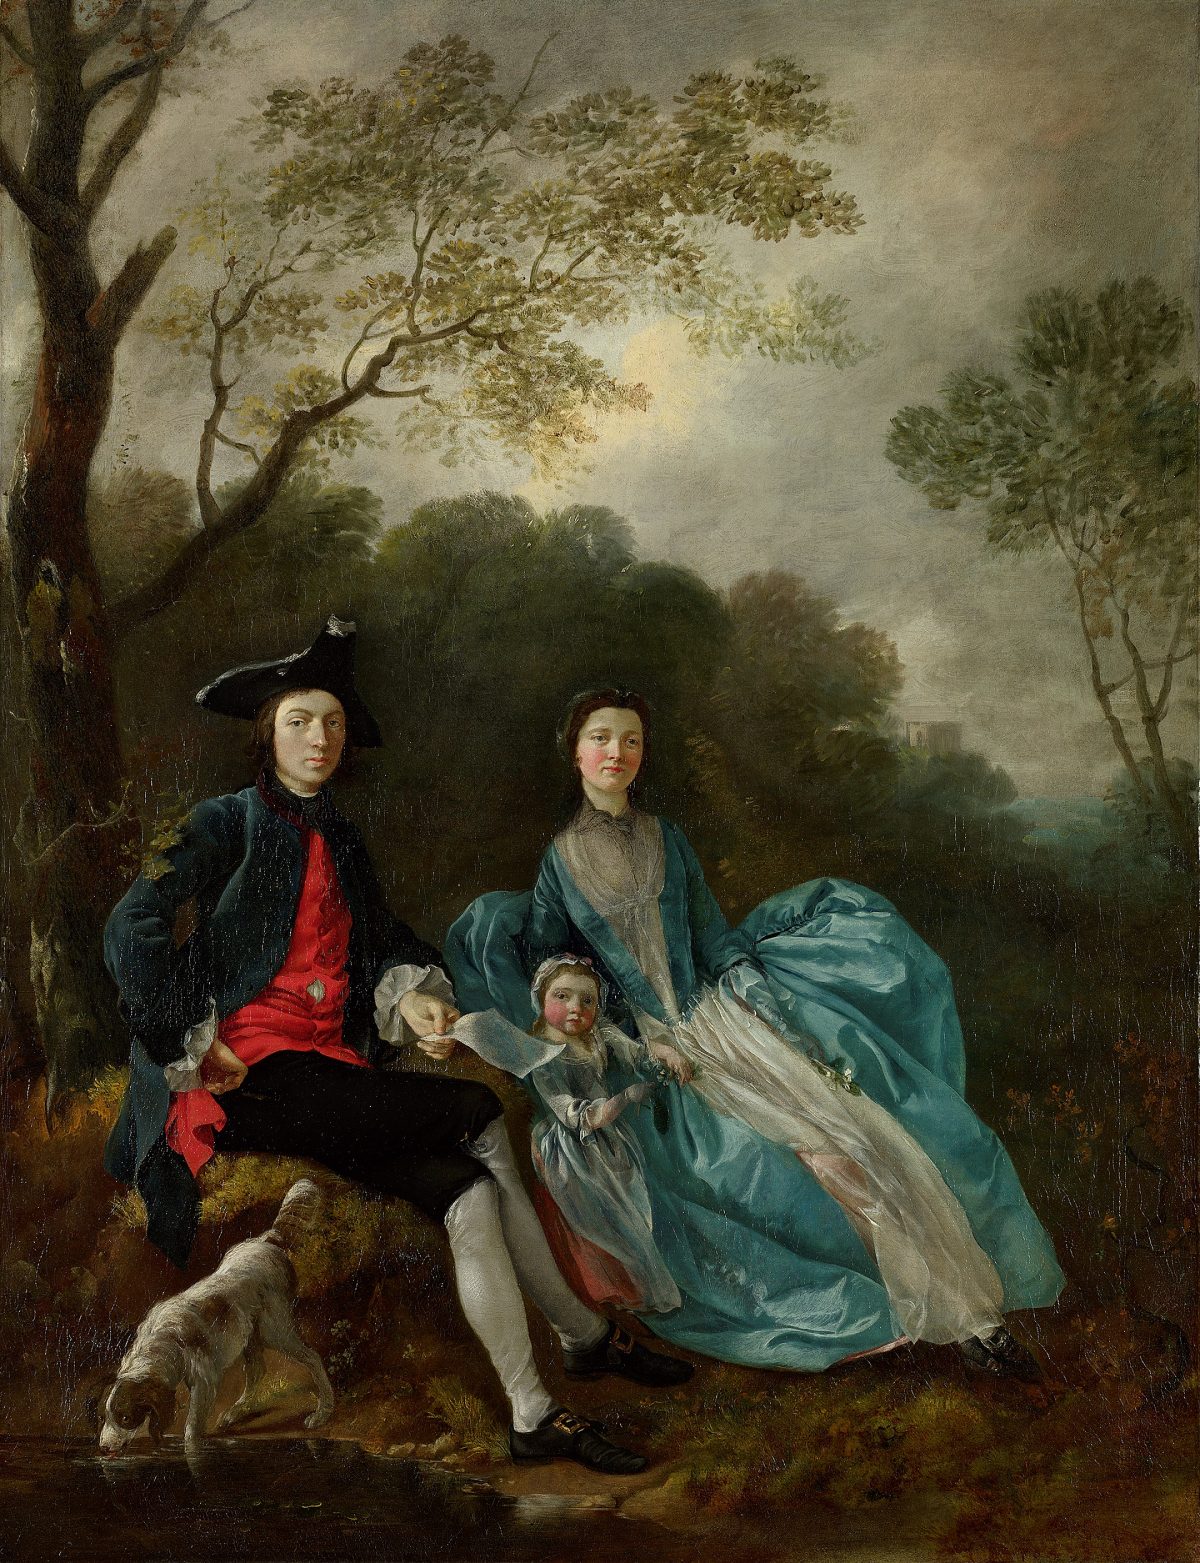 18th century man with wife and child